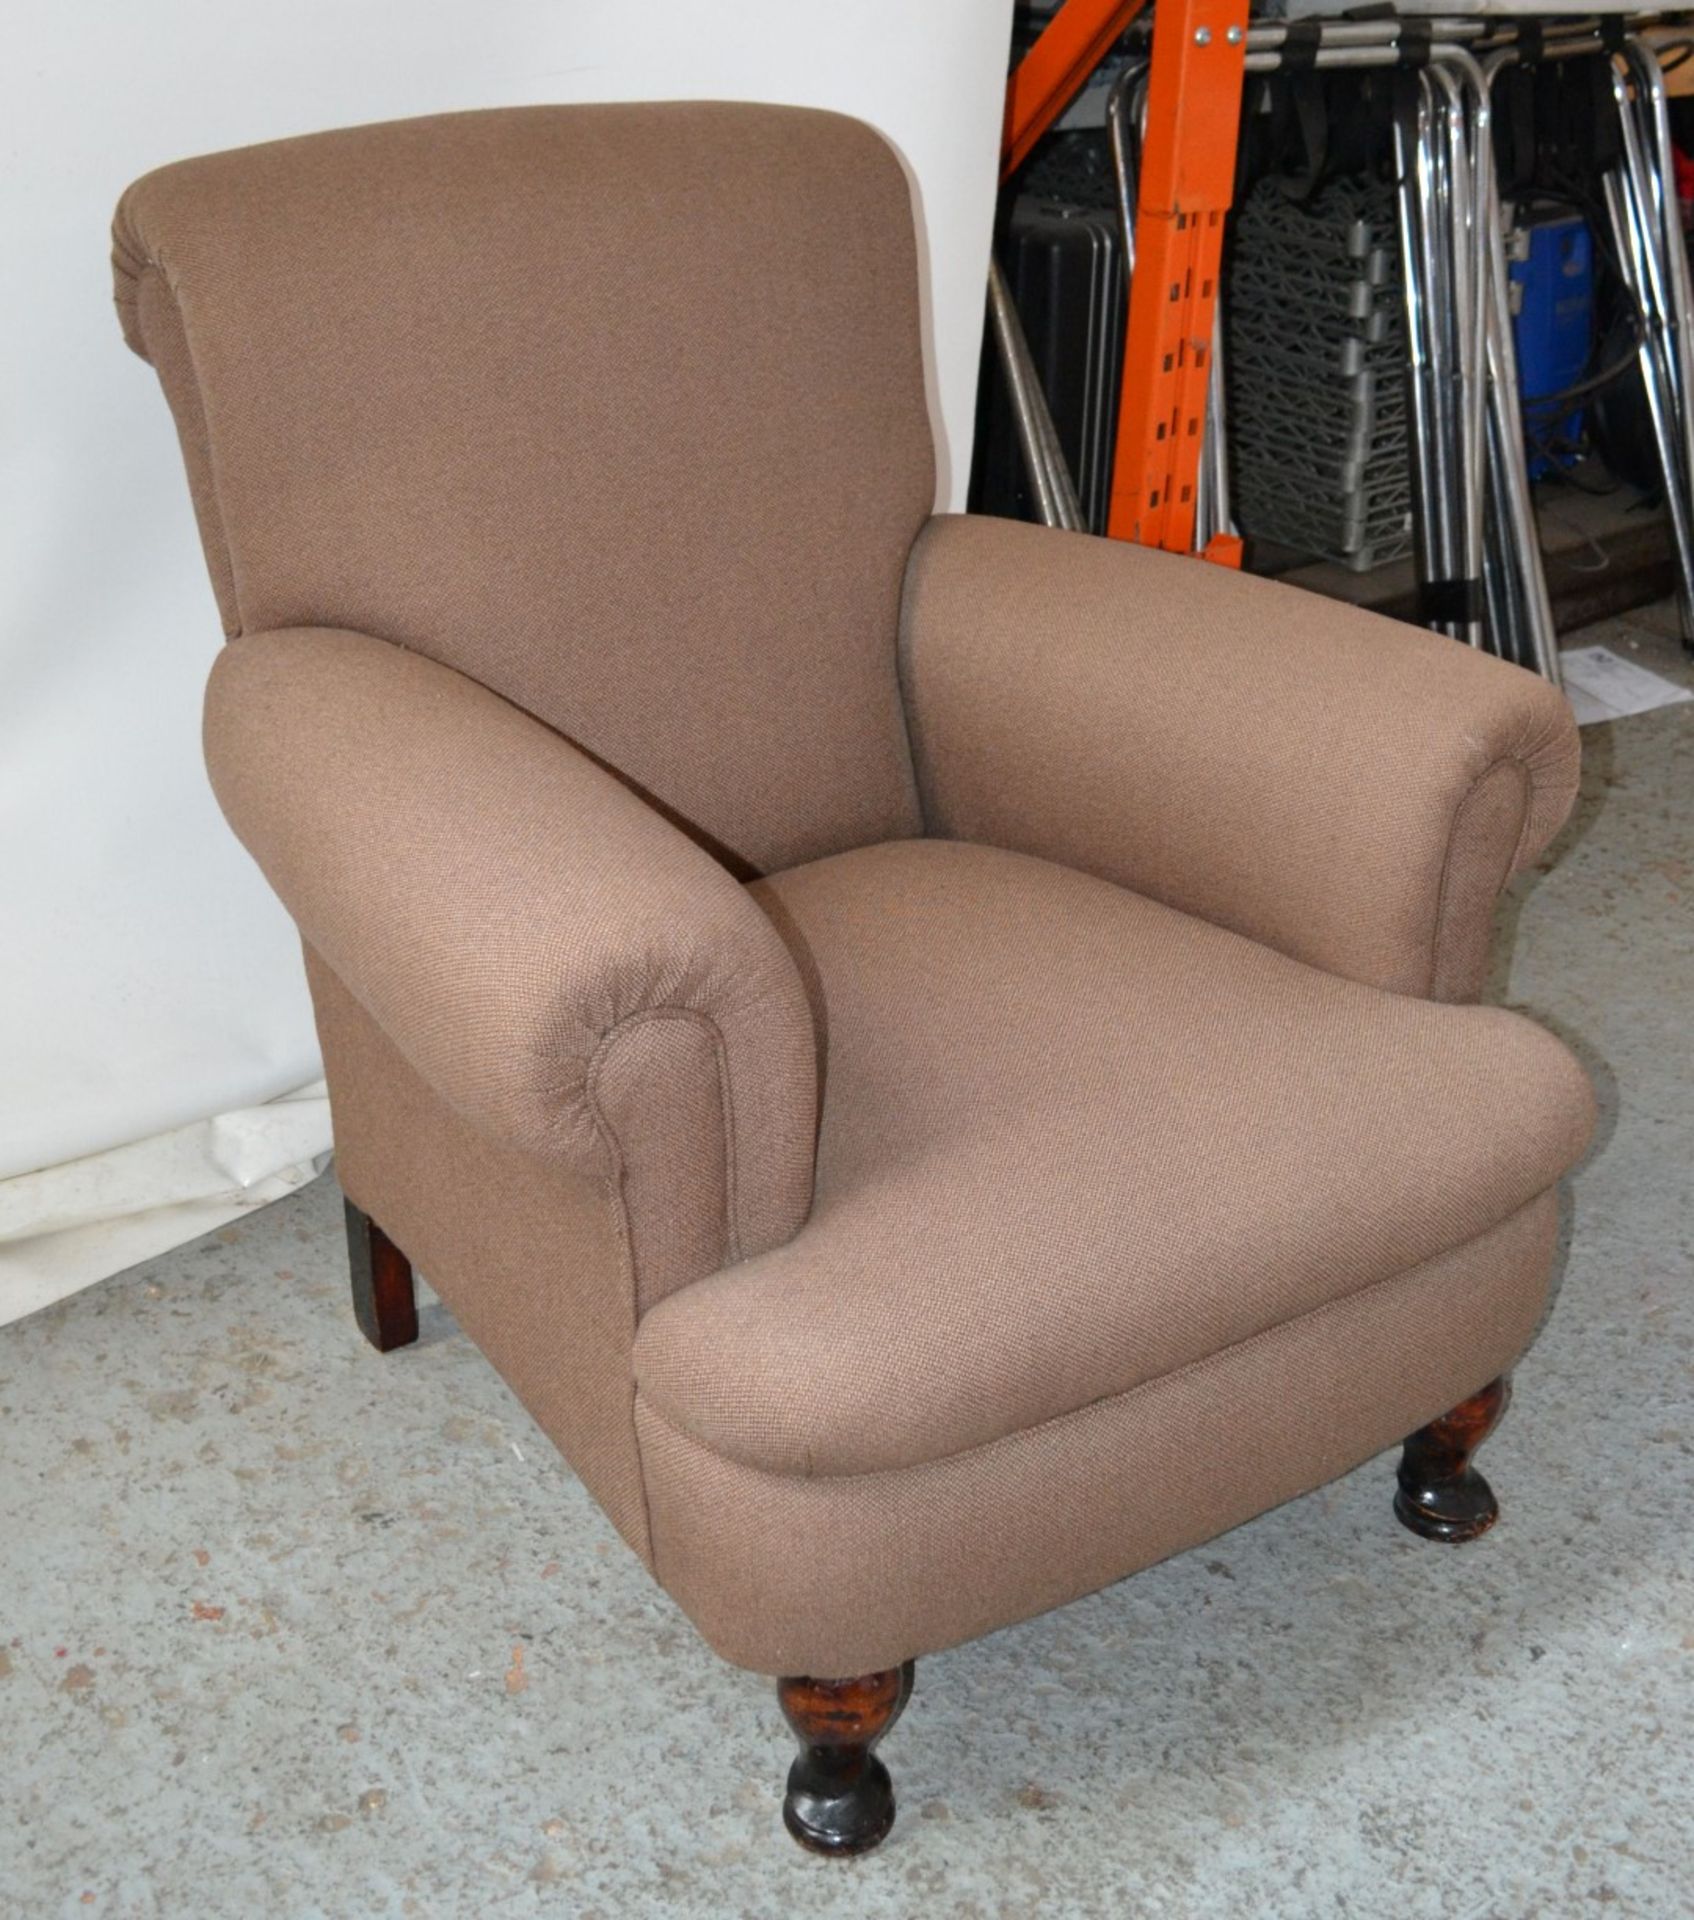 1 x Attractive Brown Fabric Armchair With Wooden Legs - CL314 - Location: Altrincham WA14 - *NO VAT - Image 7 of 13